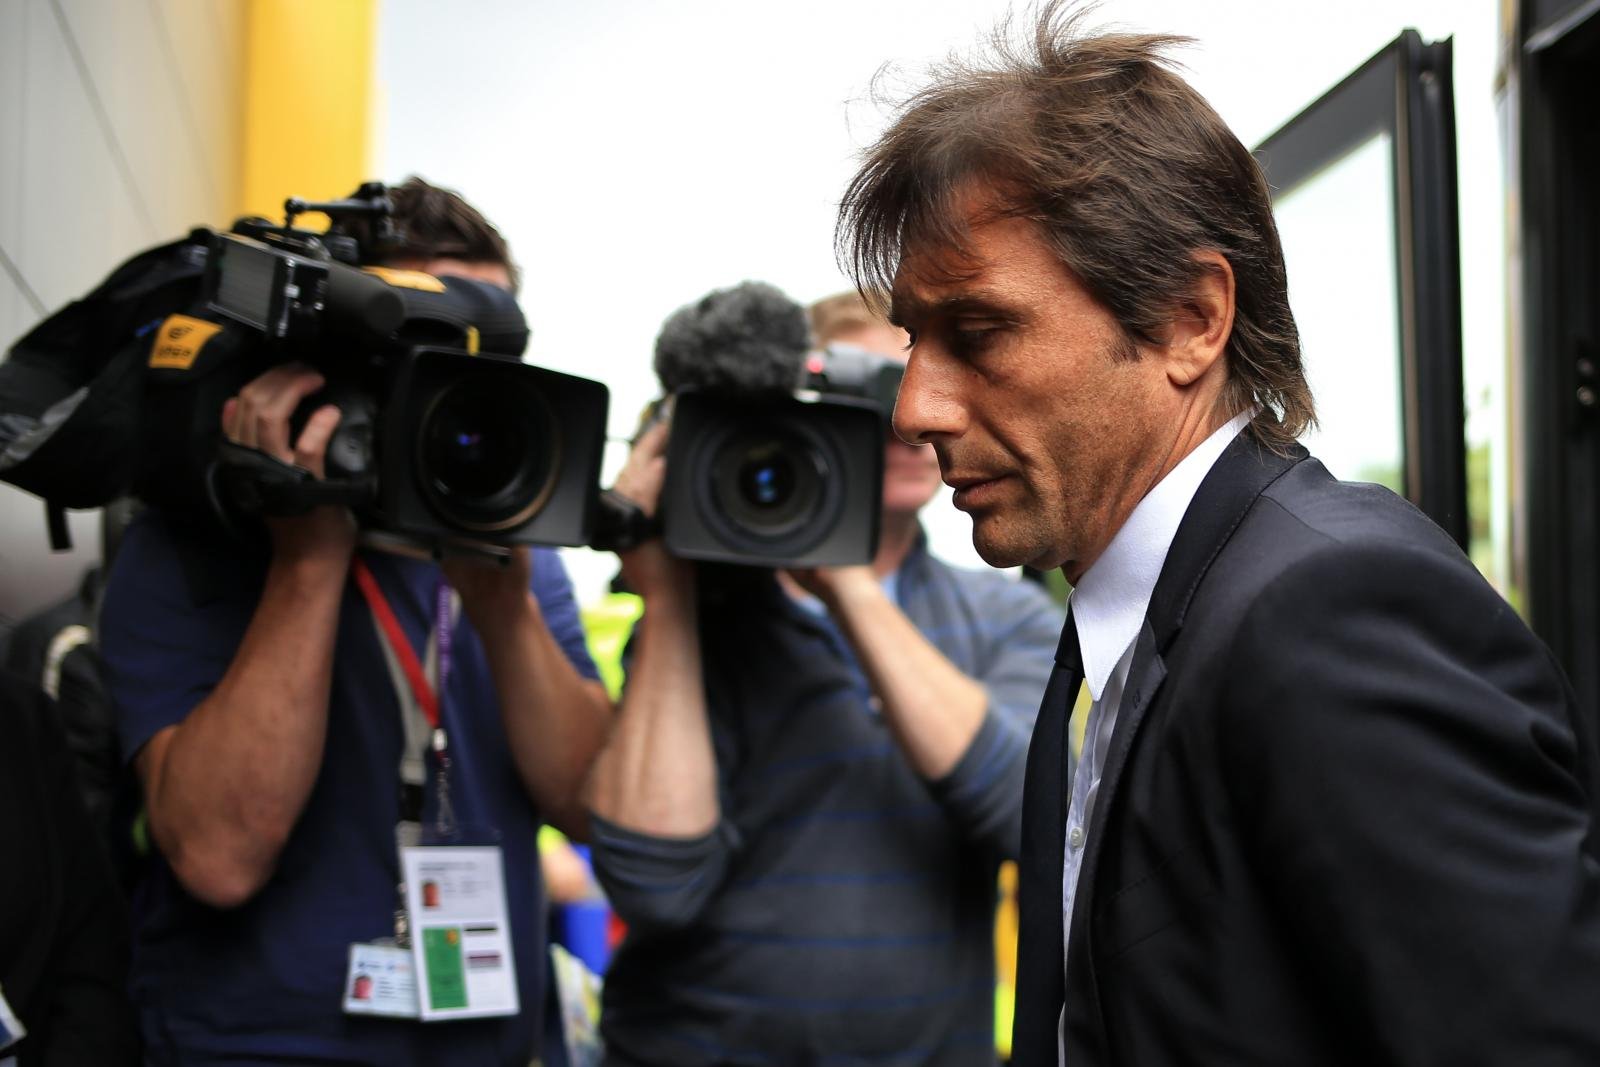 Chelsea could miss out on top targets admits Conte